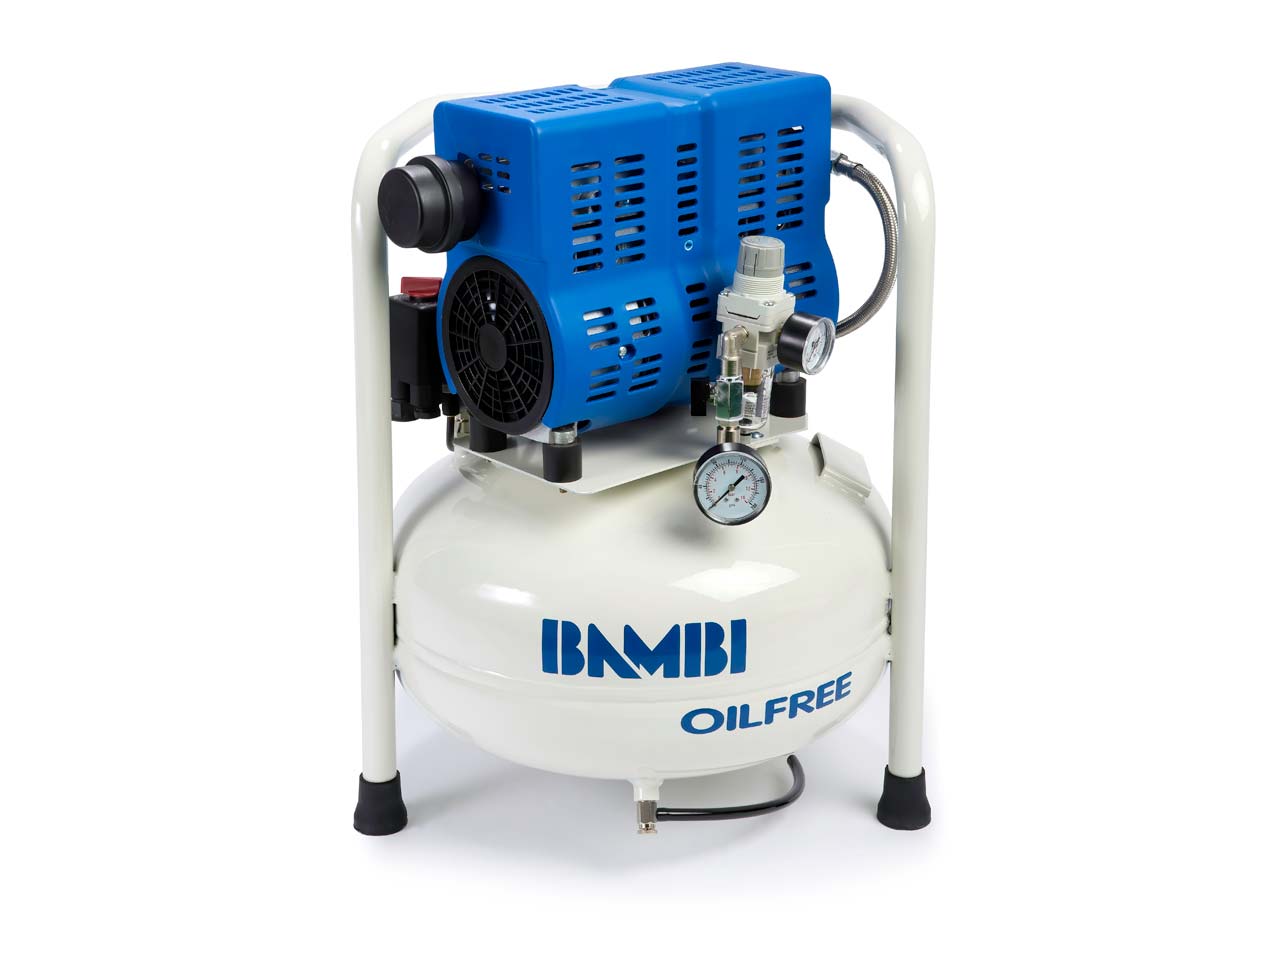 Bambi PT24 0.75hp Oil Free, 8 Bar 24 Litre Capacity Compressor Questions & Answers